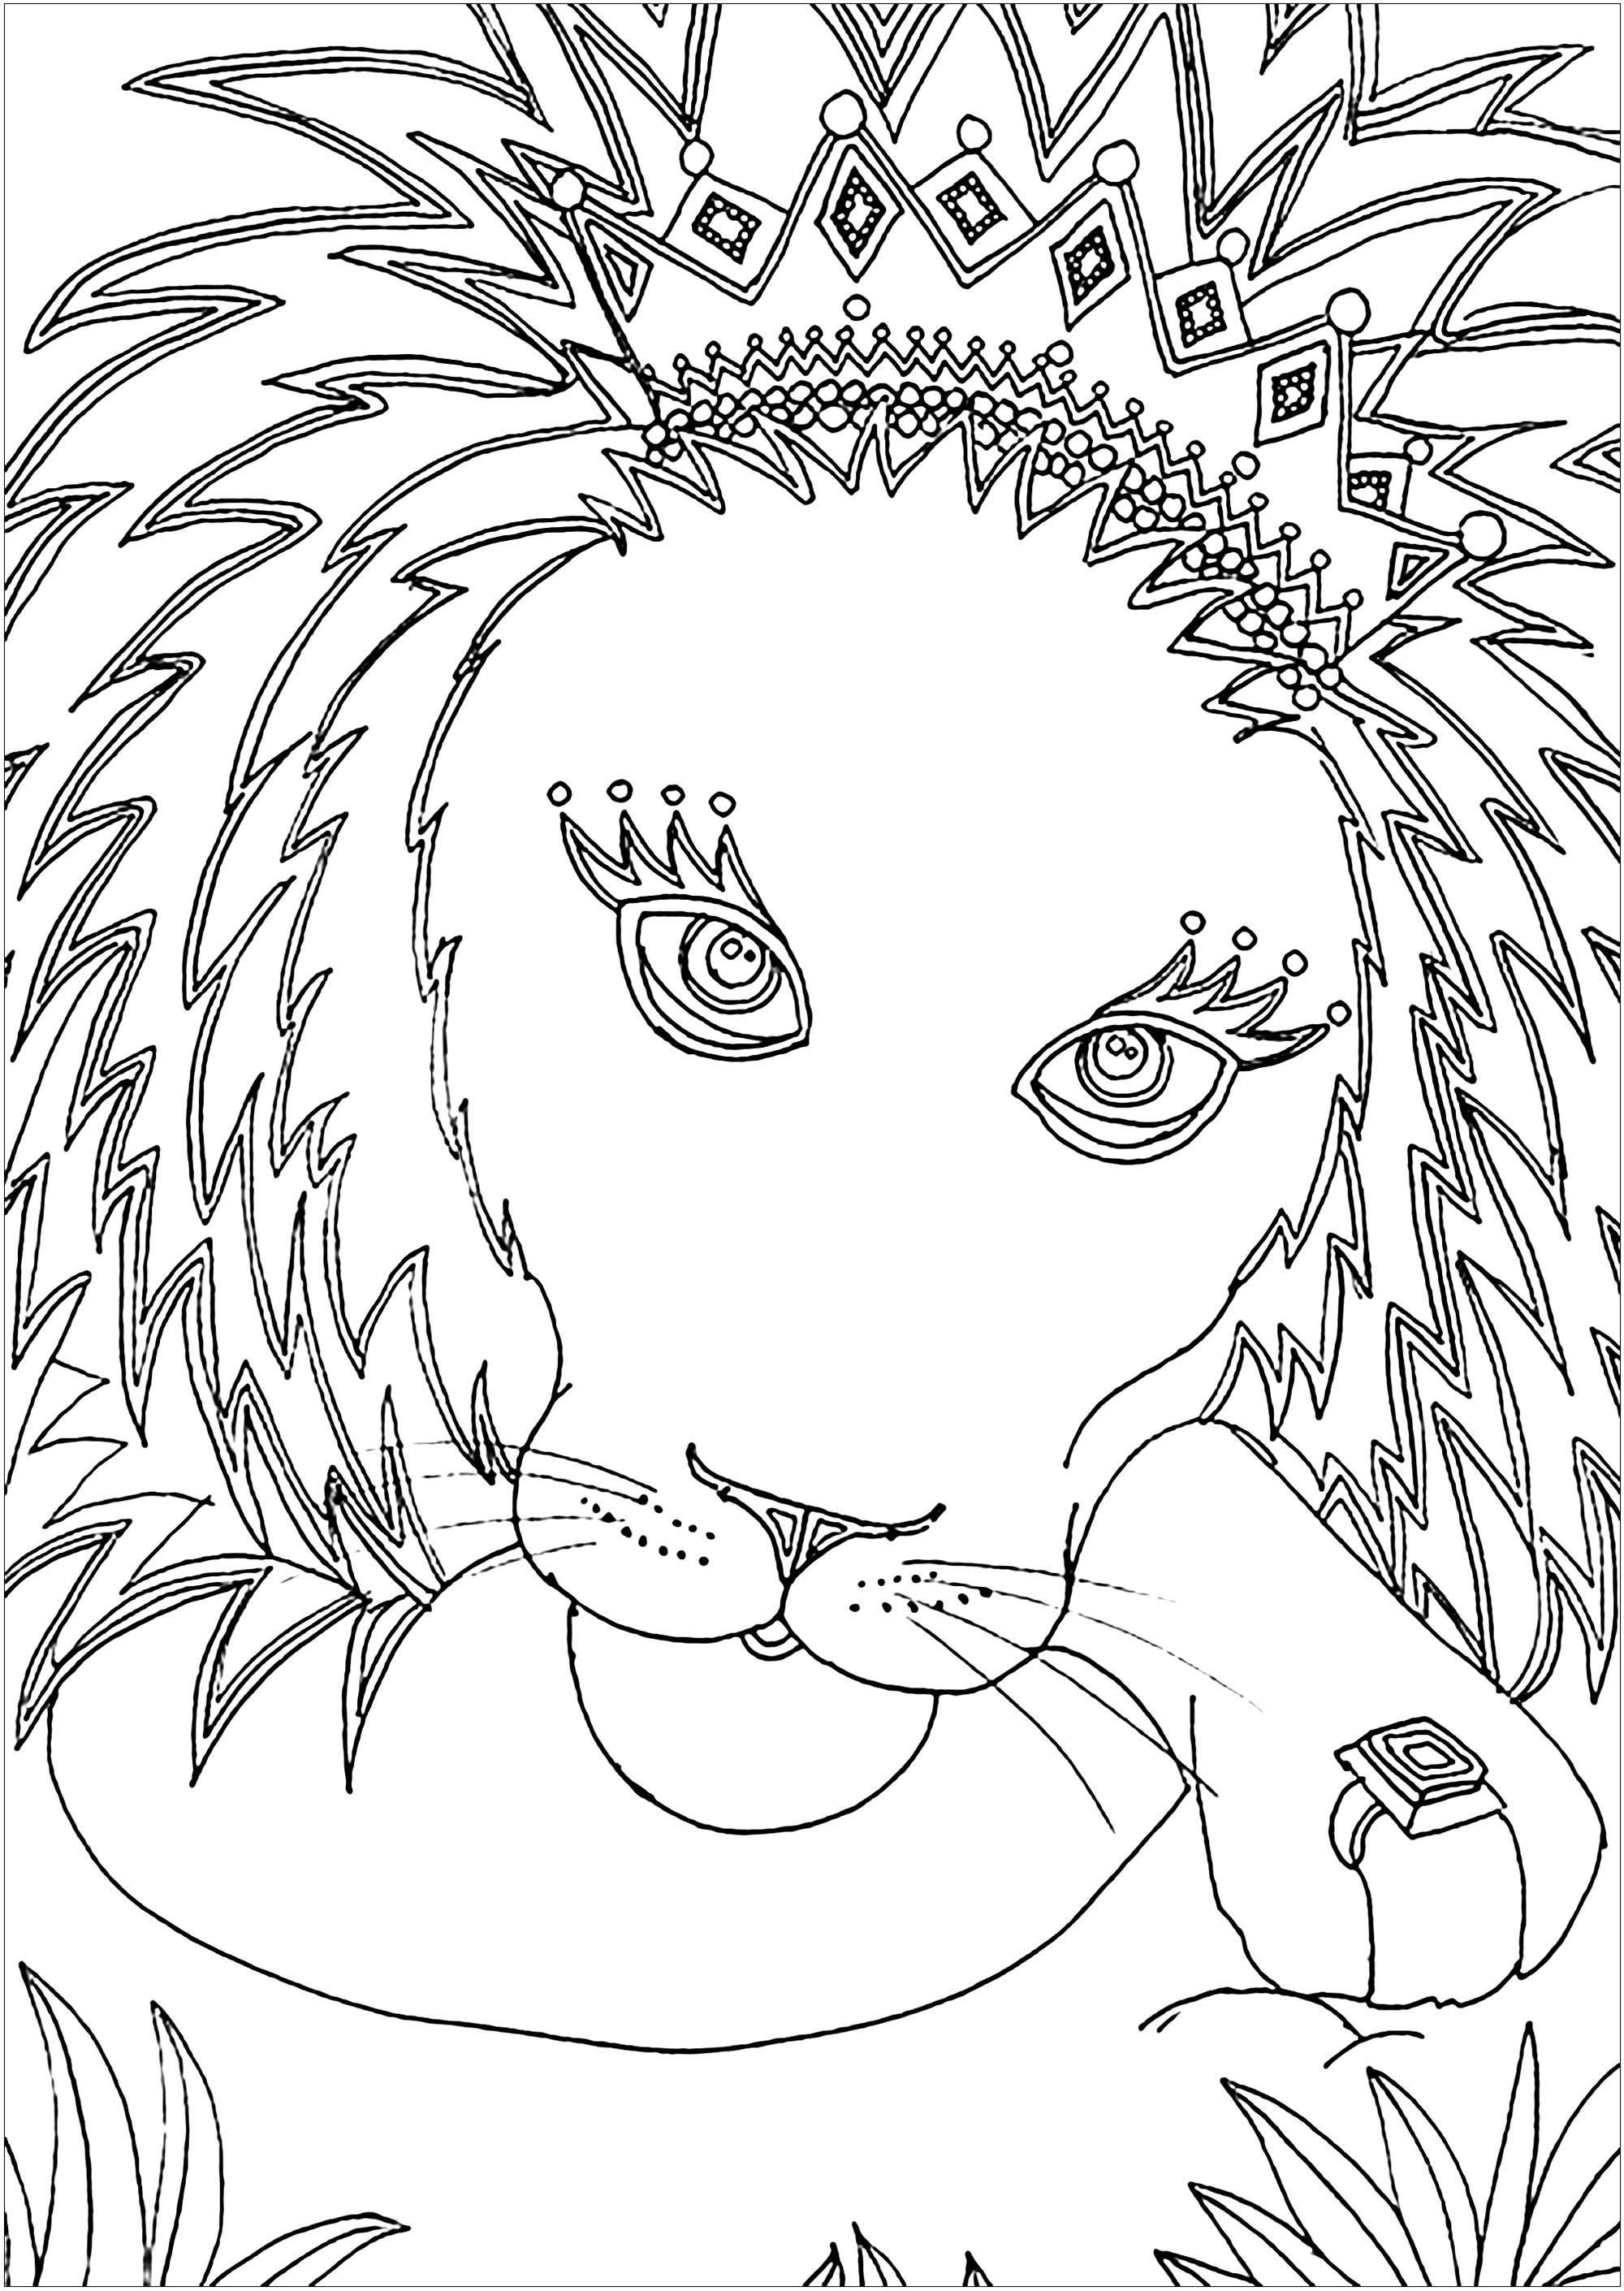 Download Lion to color for children - Lion Kids Coloring Pages